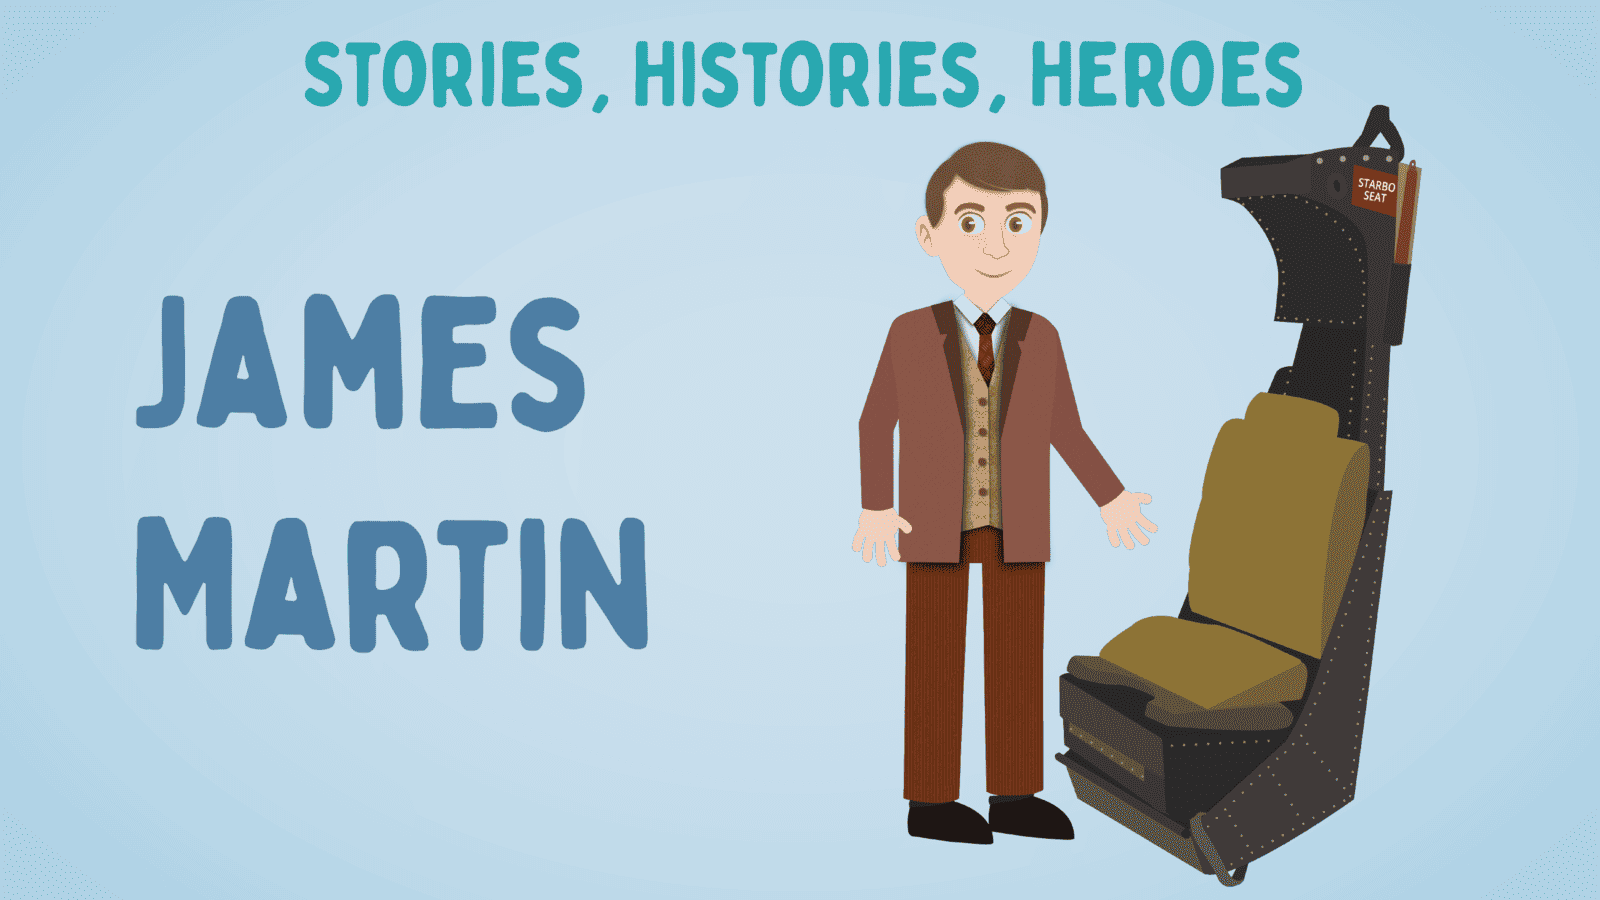 Who Invented the Ejector Seat? – The Inspiring Story of The Ulster-Scots Inventor James Martin: The Innovator Who Changed the World